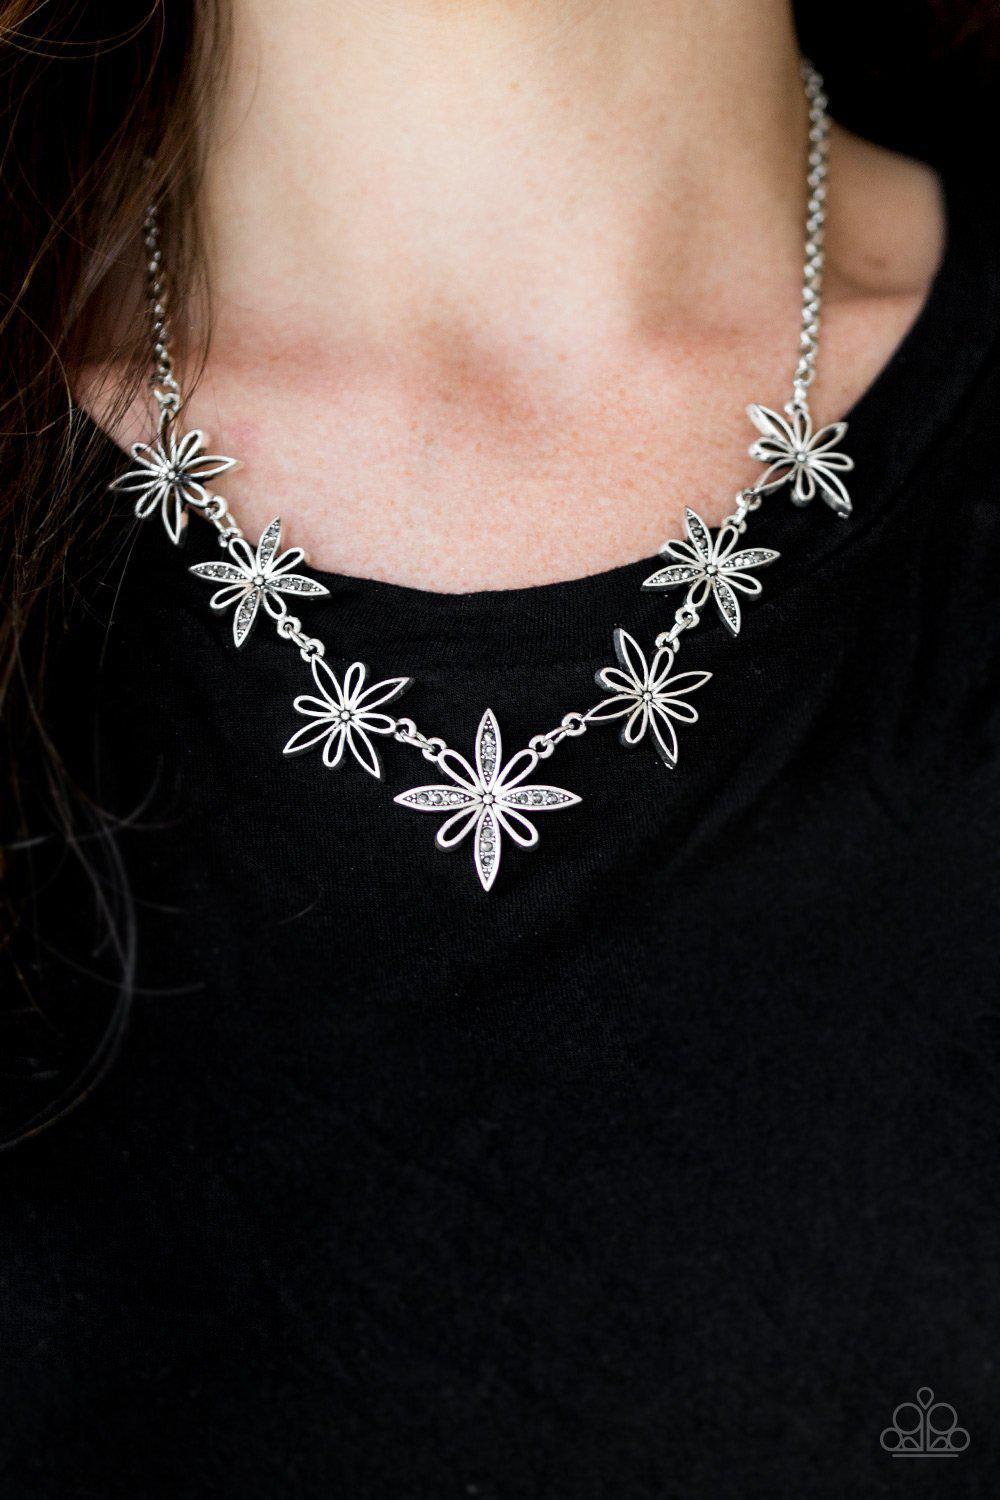 Decked Out in Daisies Silver Necklace and matching Earrings - Paparazzi Accessories-CarasShop.com - $5 Jewelry by Cara Jewels